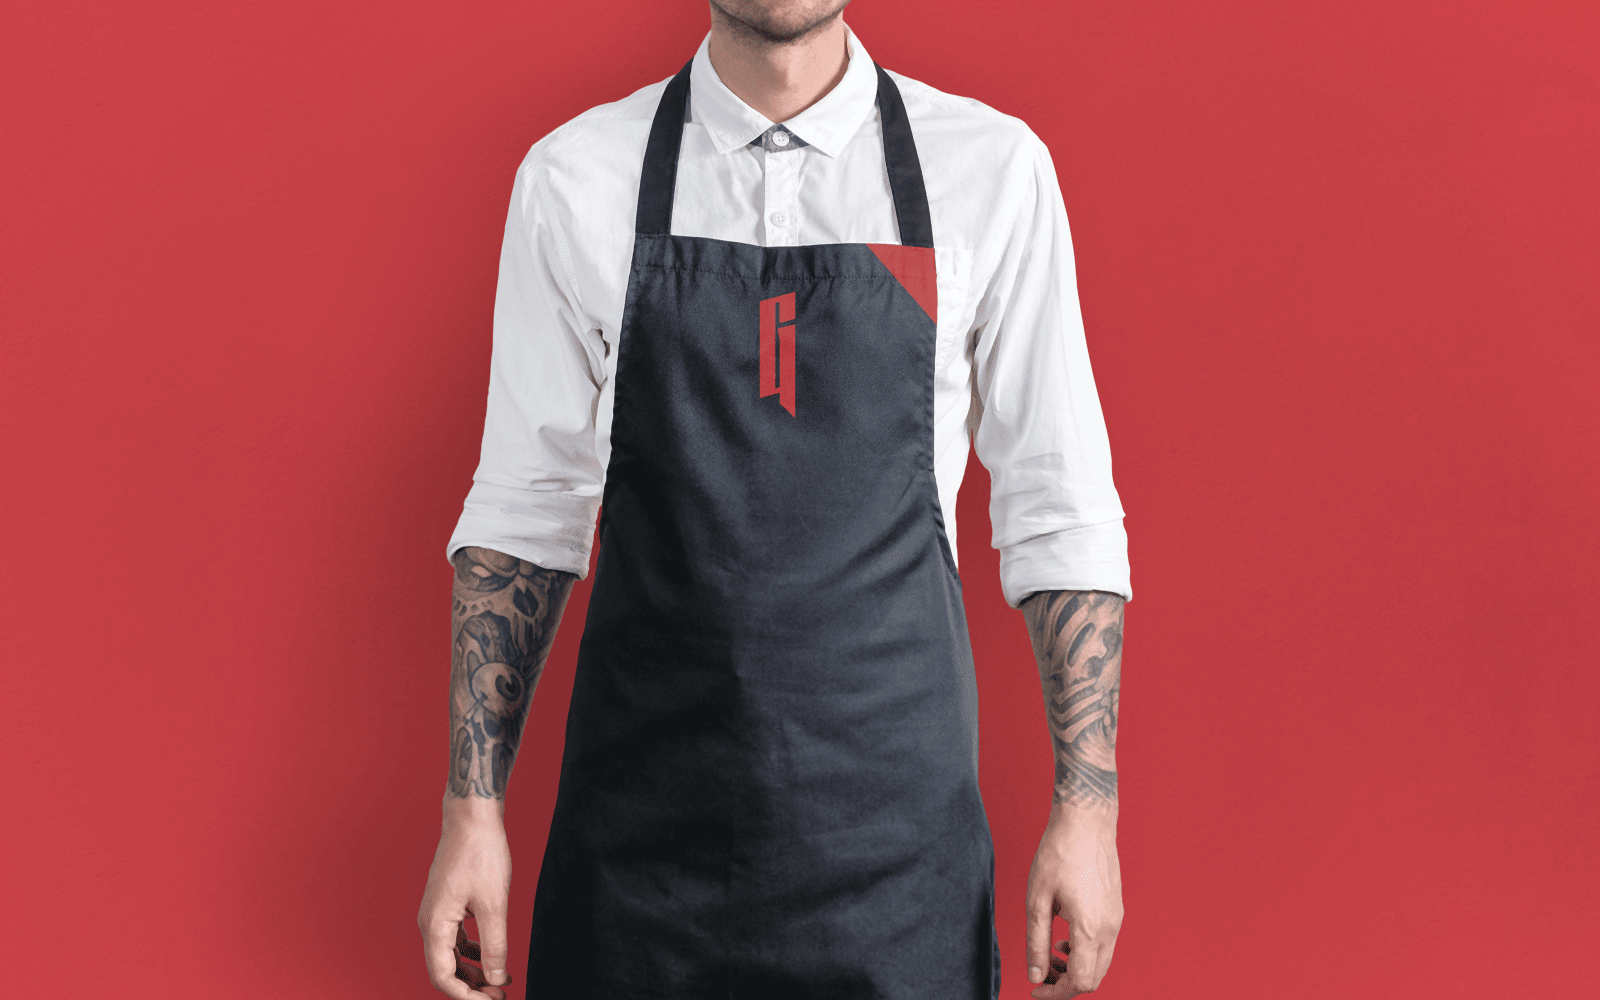 The Grillmaster BBQ & Catering Apron